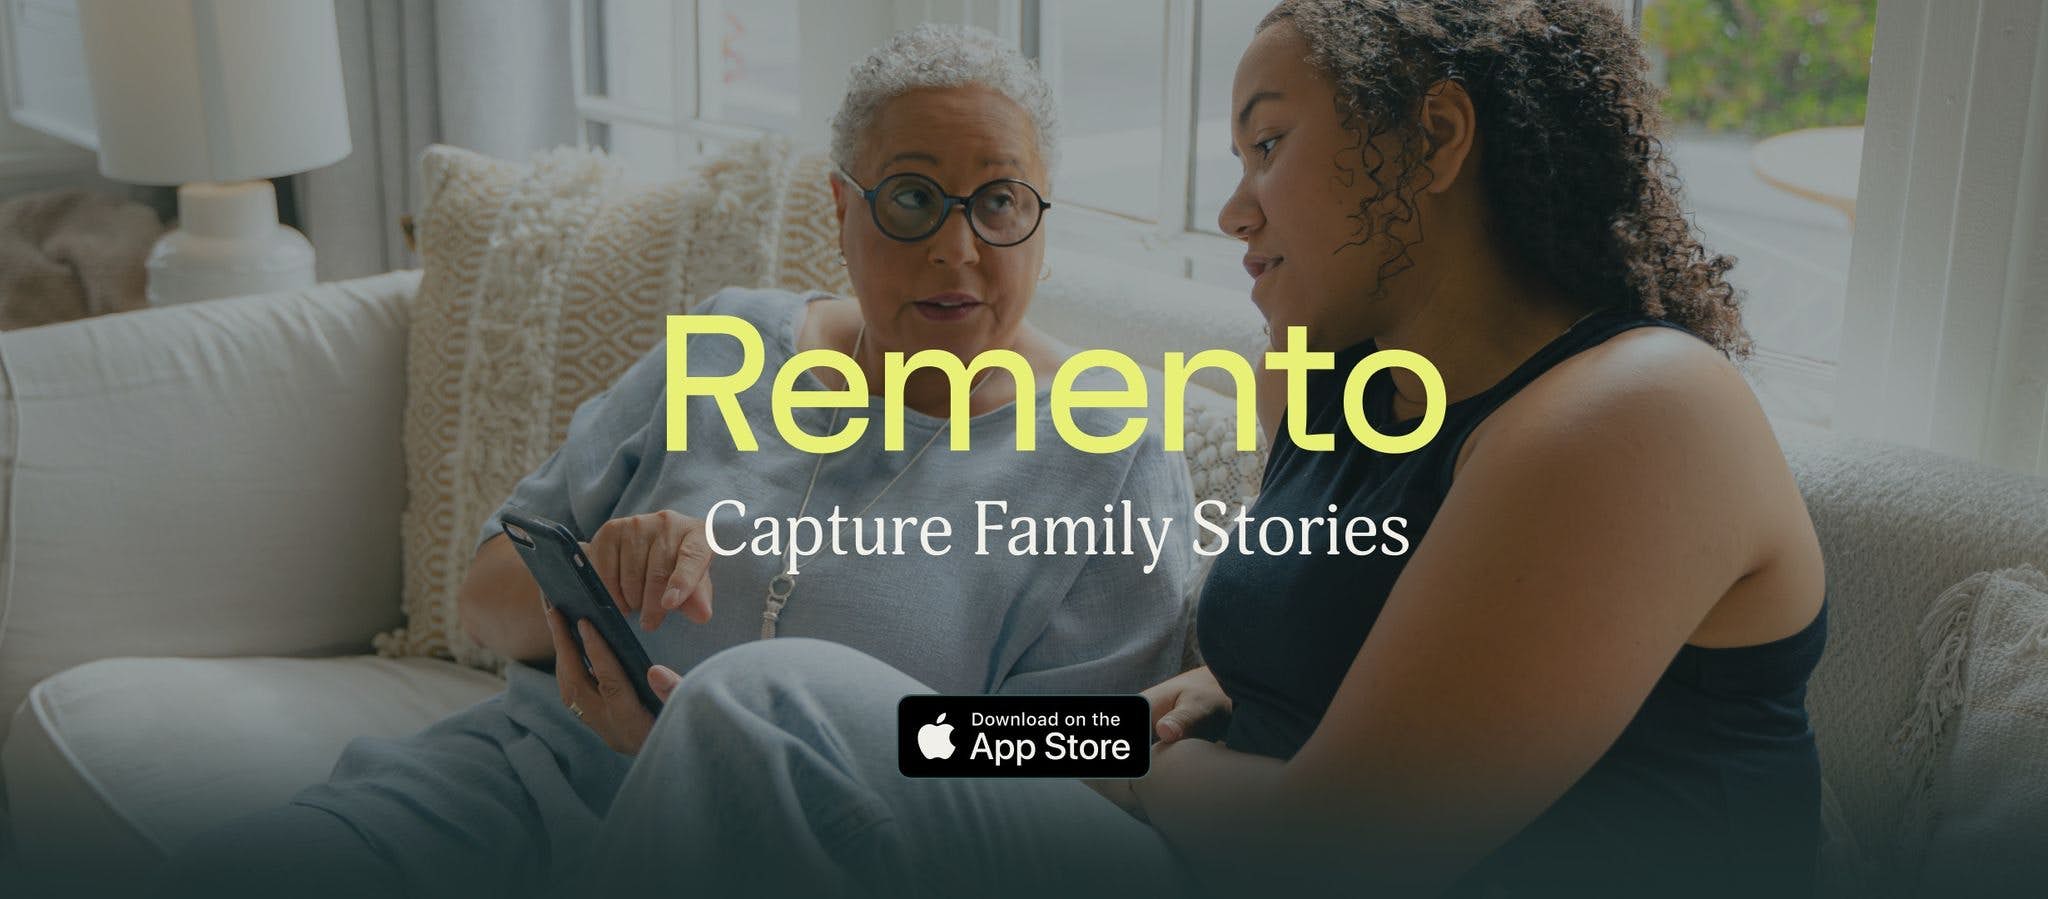 Remento, capture family stories